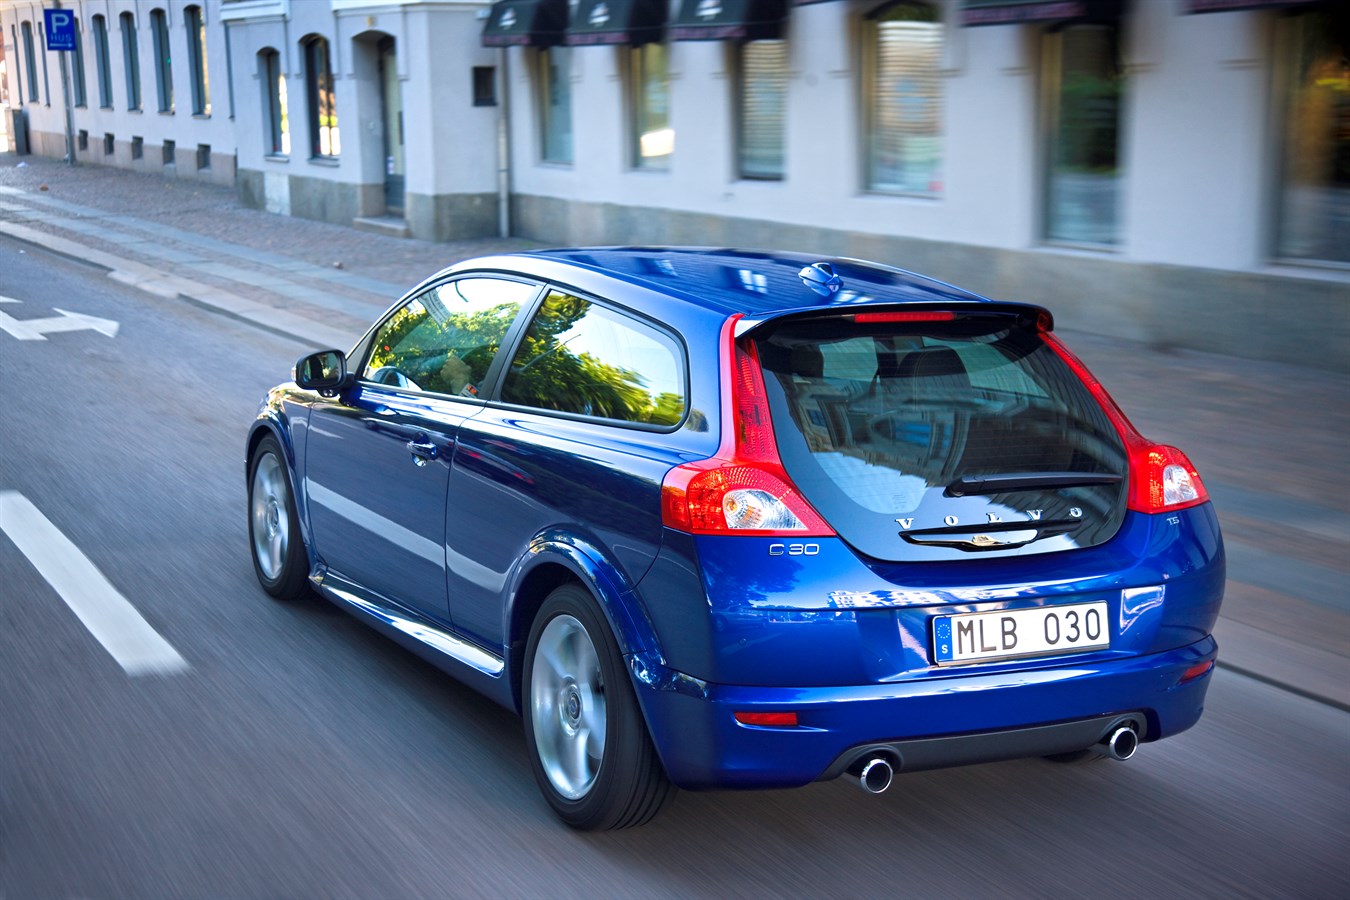 Volvo C30 Earns Top Safety Pick From IIHS - Volvo Car USA Newsroom